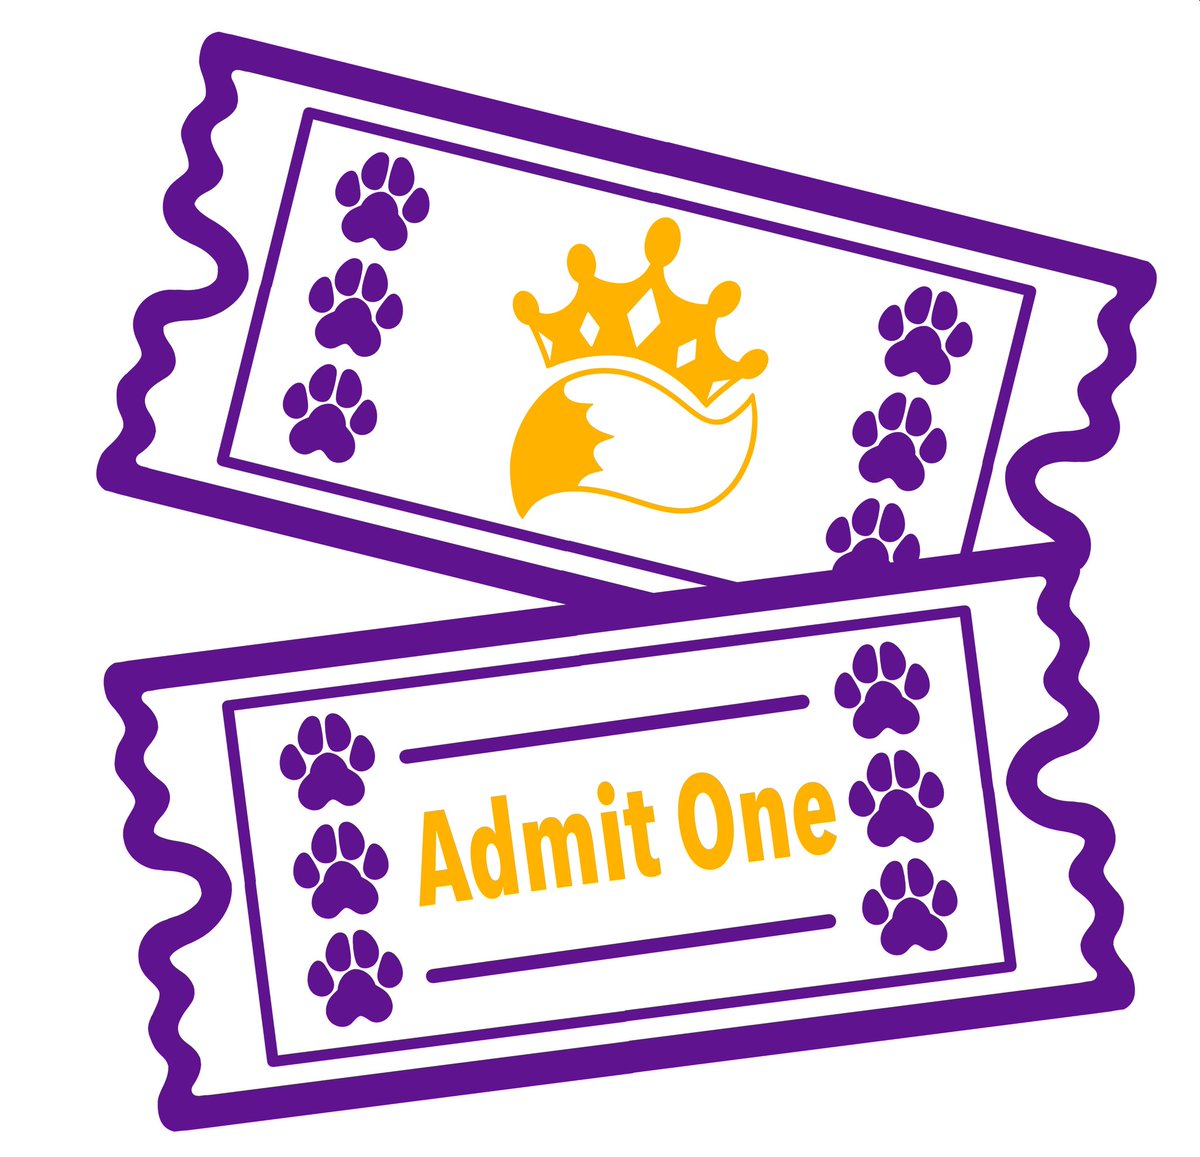 Final day for tickets! At 11 PM April 30th, we will be closing our ticket sales page. A small number of tickets will be available at the door. Cash only, 80 CAD. To guarantee your entry to the event, we encourage you to buy a ticket online! royalcityfurries.com